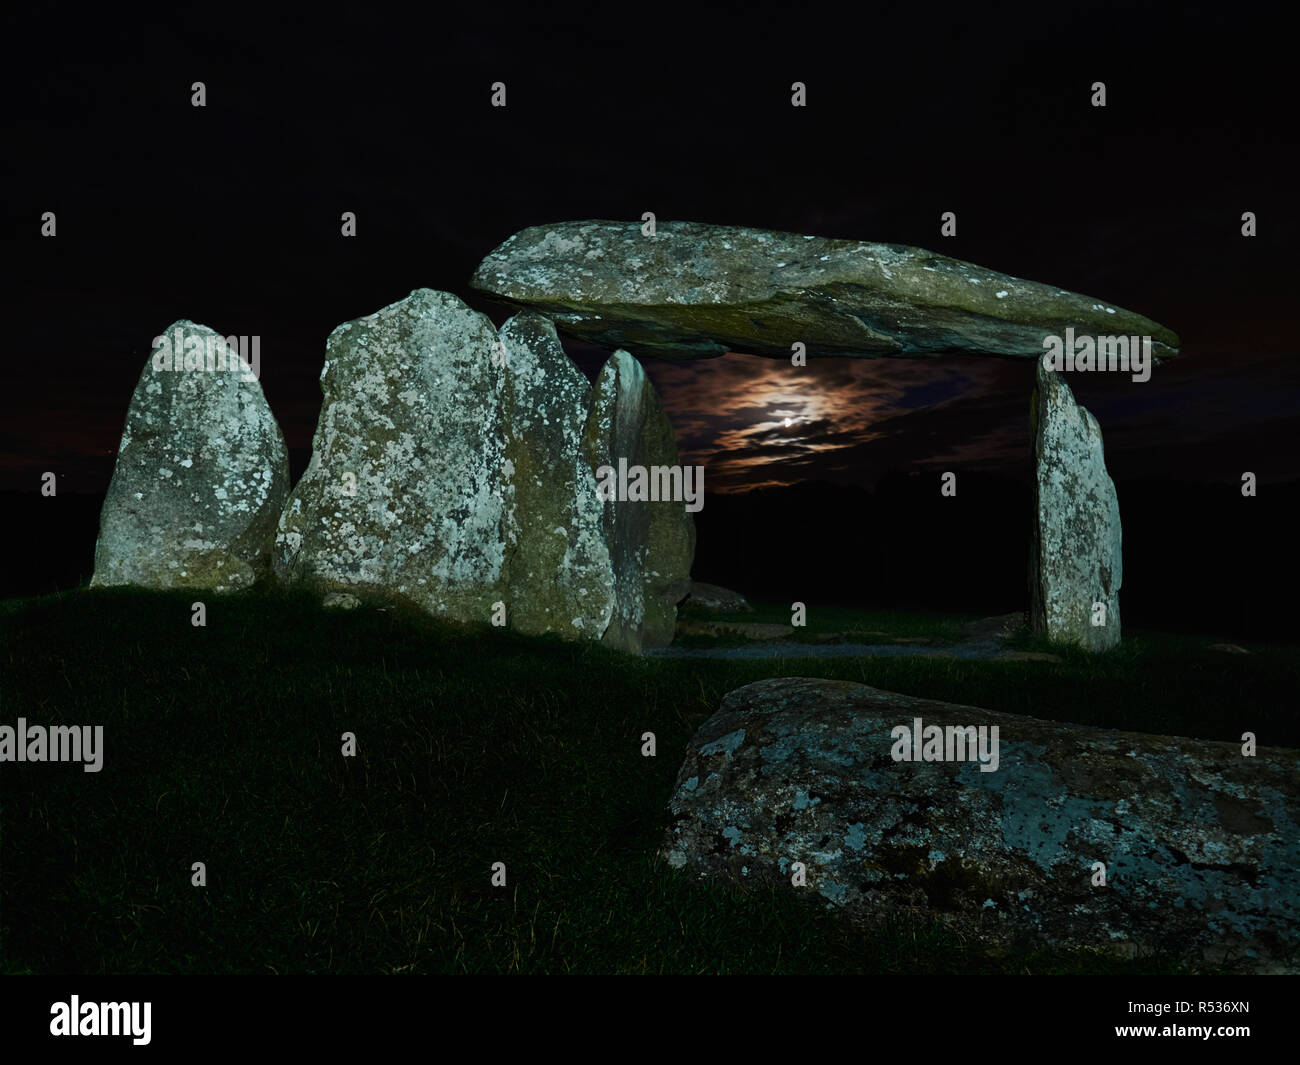 Pentre Ifan Burial Chamber (3,500 BC) at Moonset. Situated in the Preseli Hills Pembrokeshire it is the largest Neolithic burial chamber in Wales UK. Stock Photo